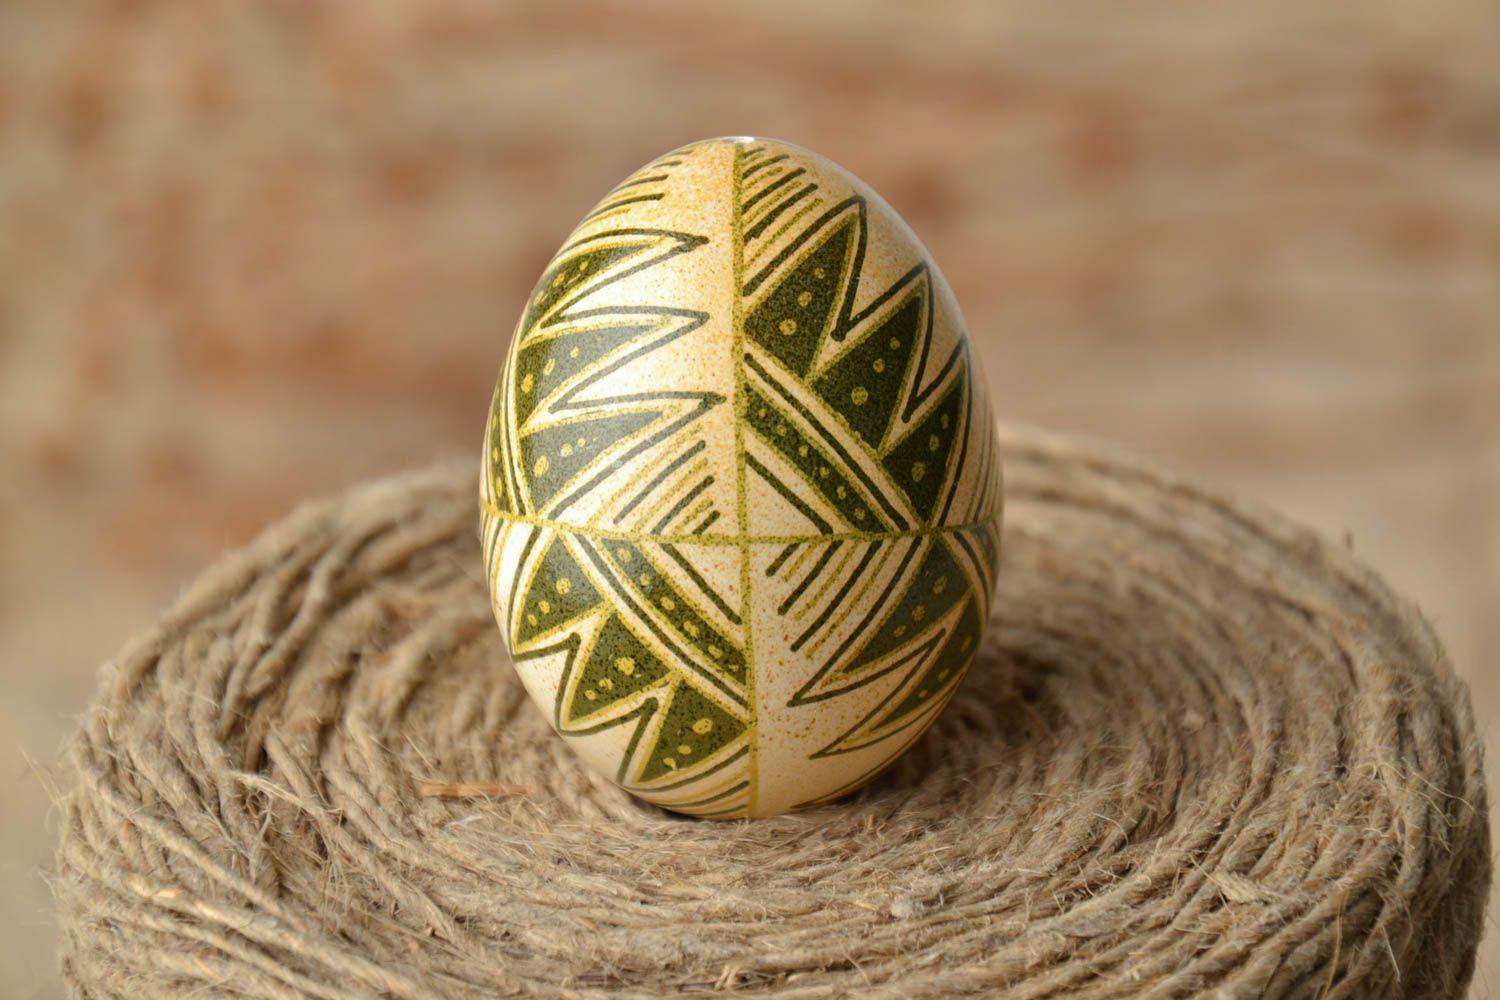 Handmade Easter egg with painting photo 1